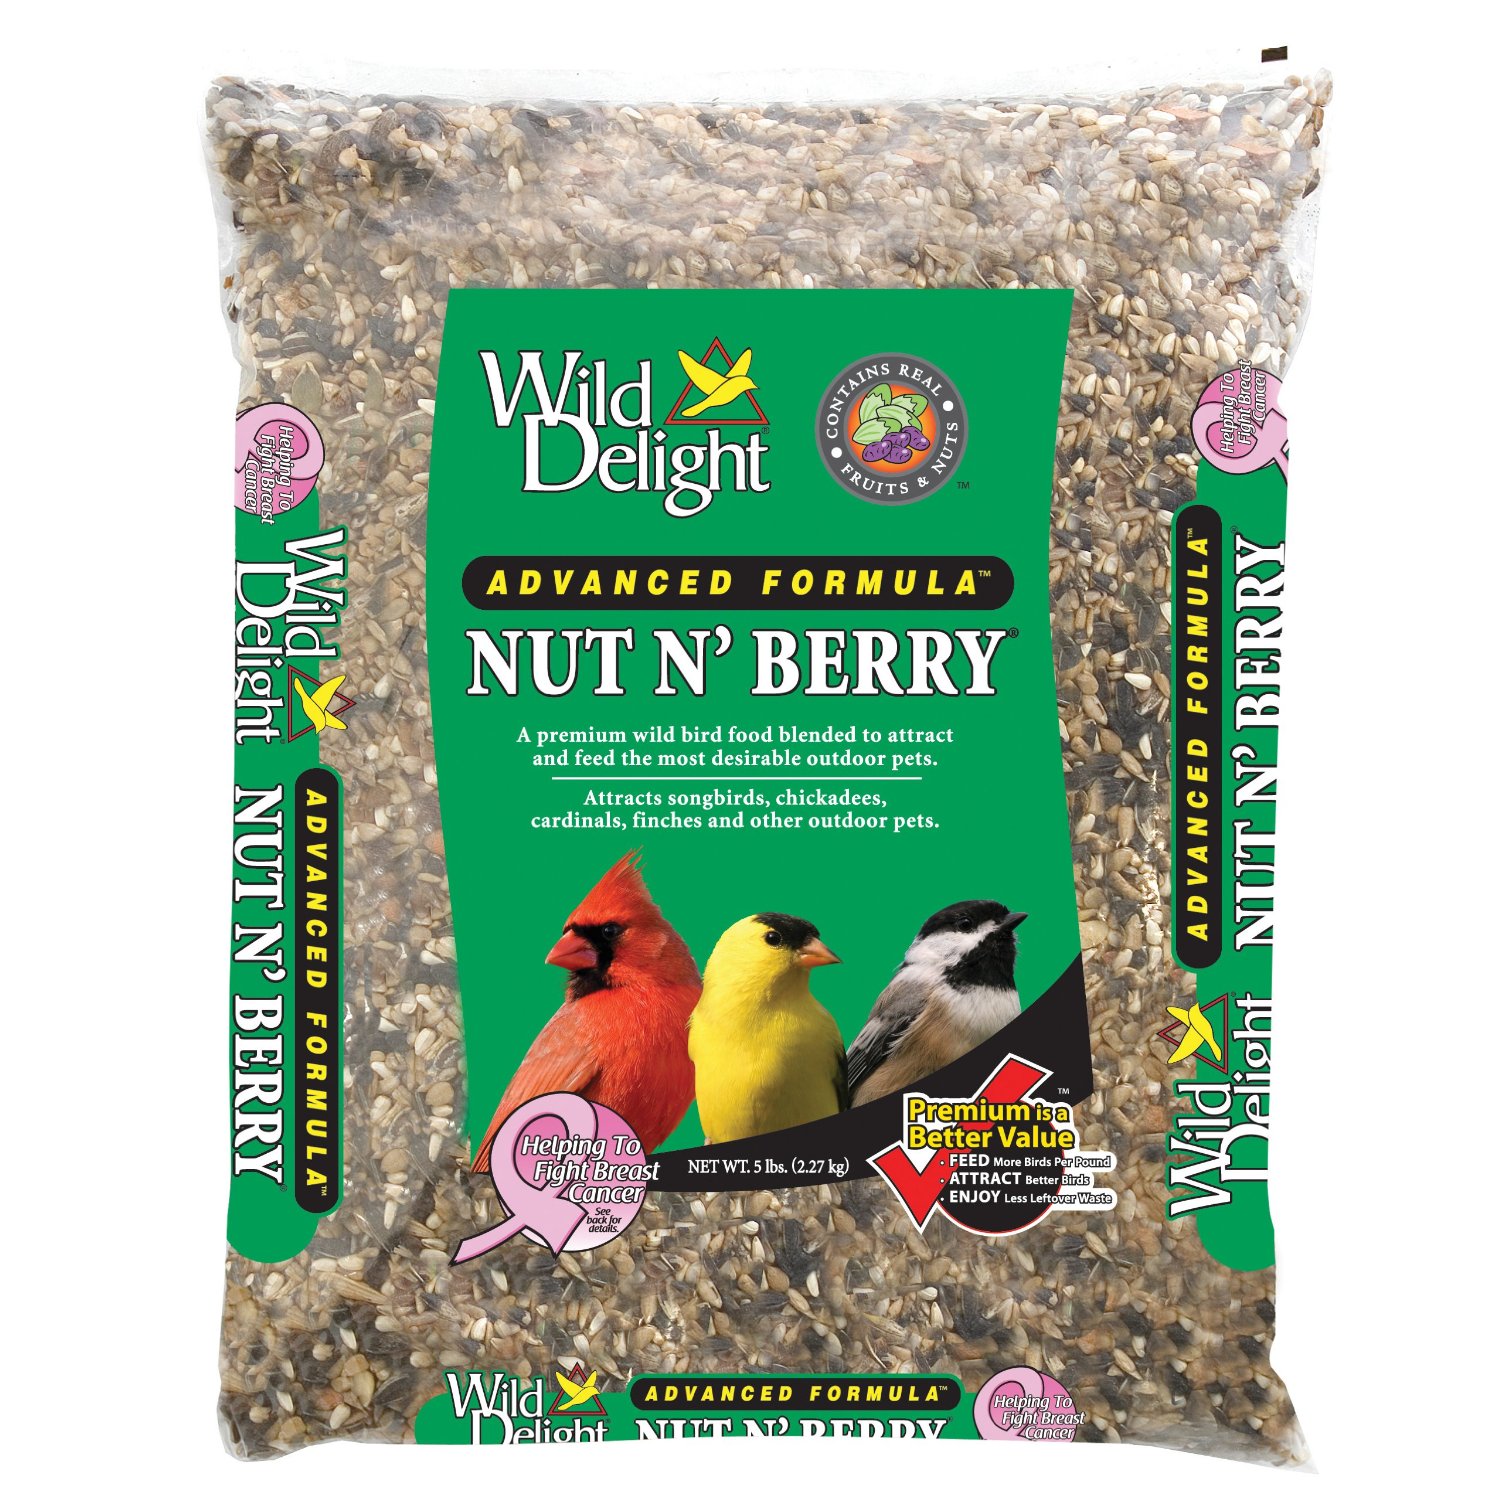 Wild Delight Nut N' Berry Seed, 5 LB